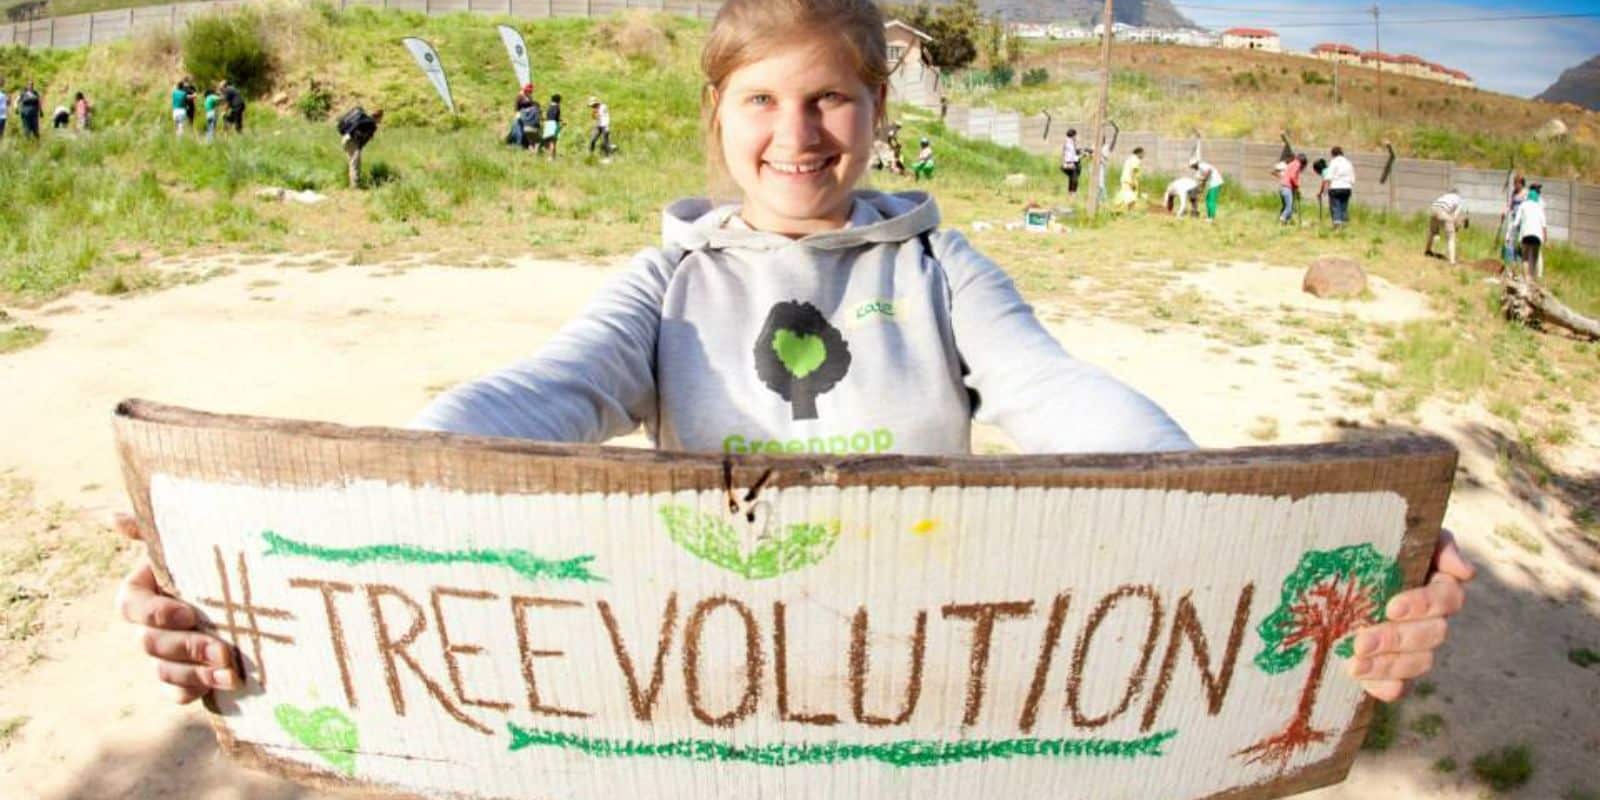 Volunteer on a sustainable project holds up a green-positive poster